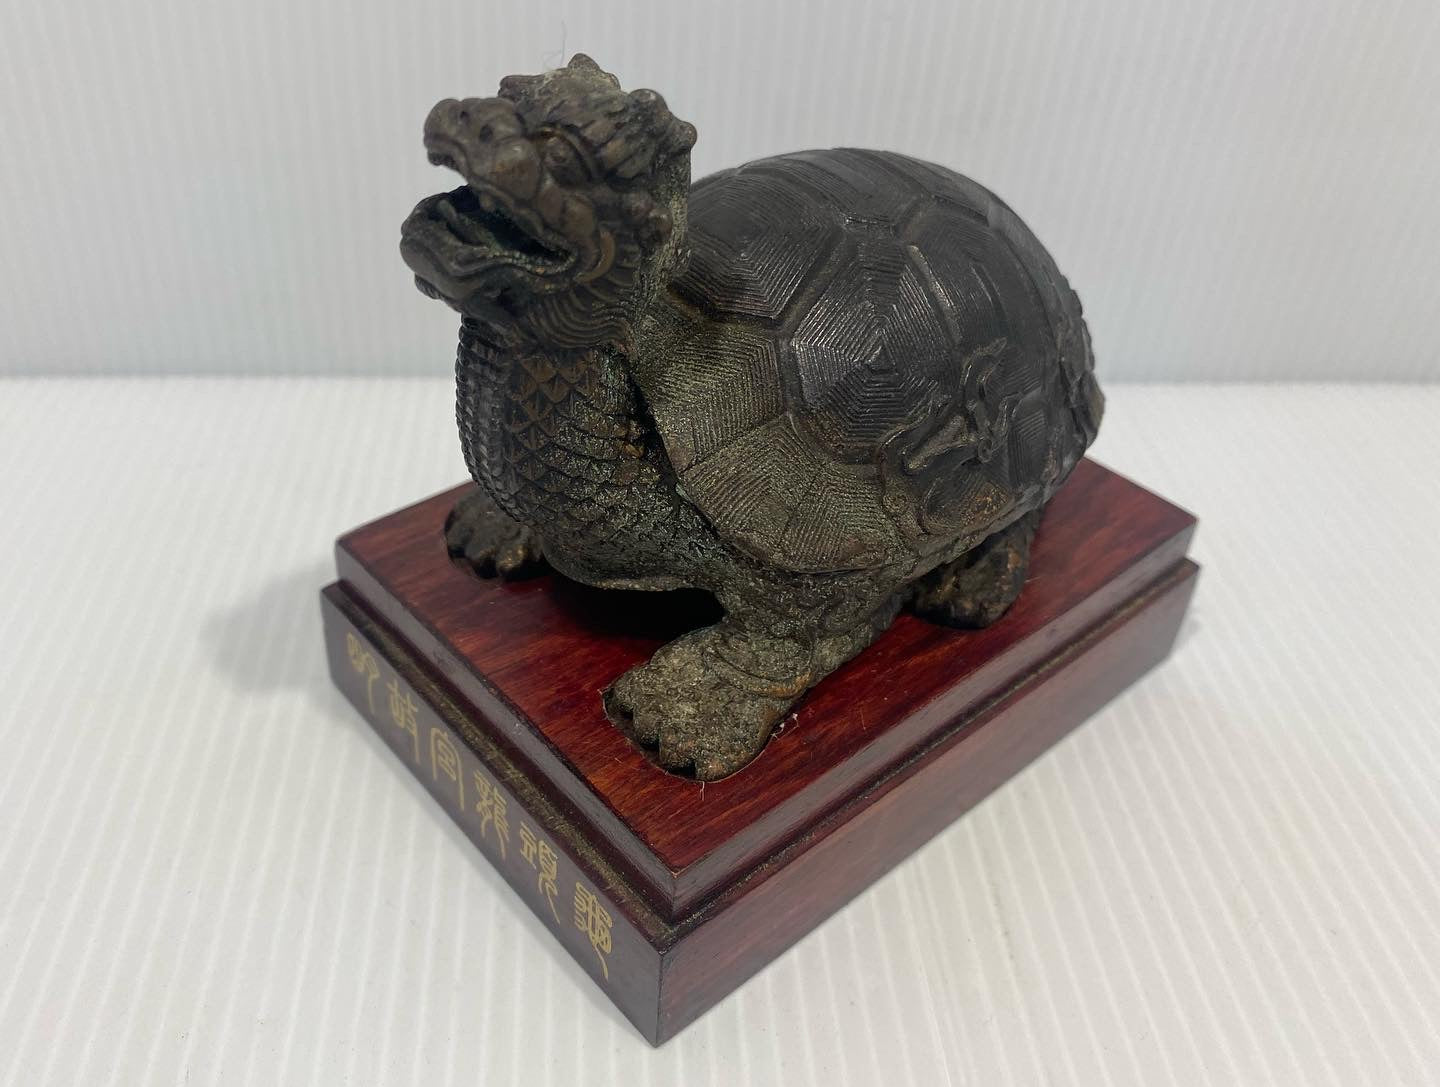 Antique Chinese Bronze Figure of a Dragon-Turtle with wood base. 1910s.